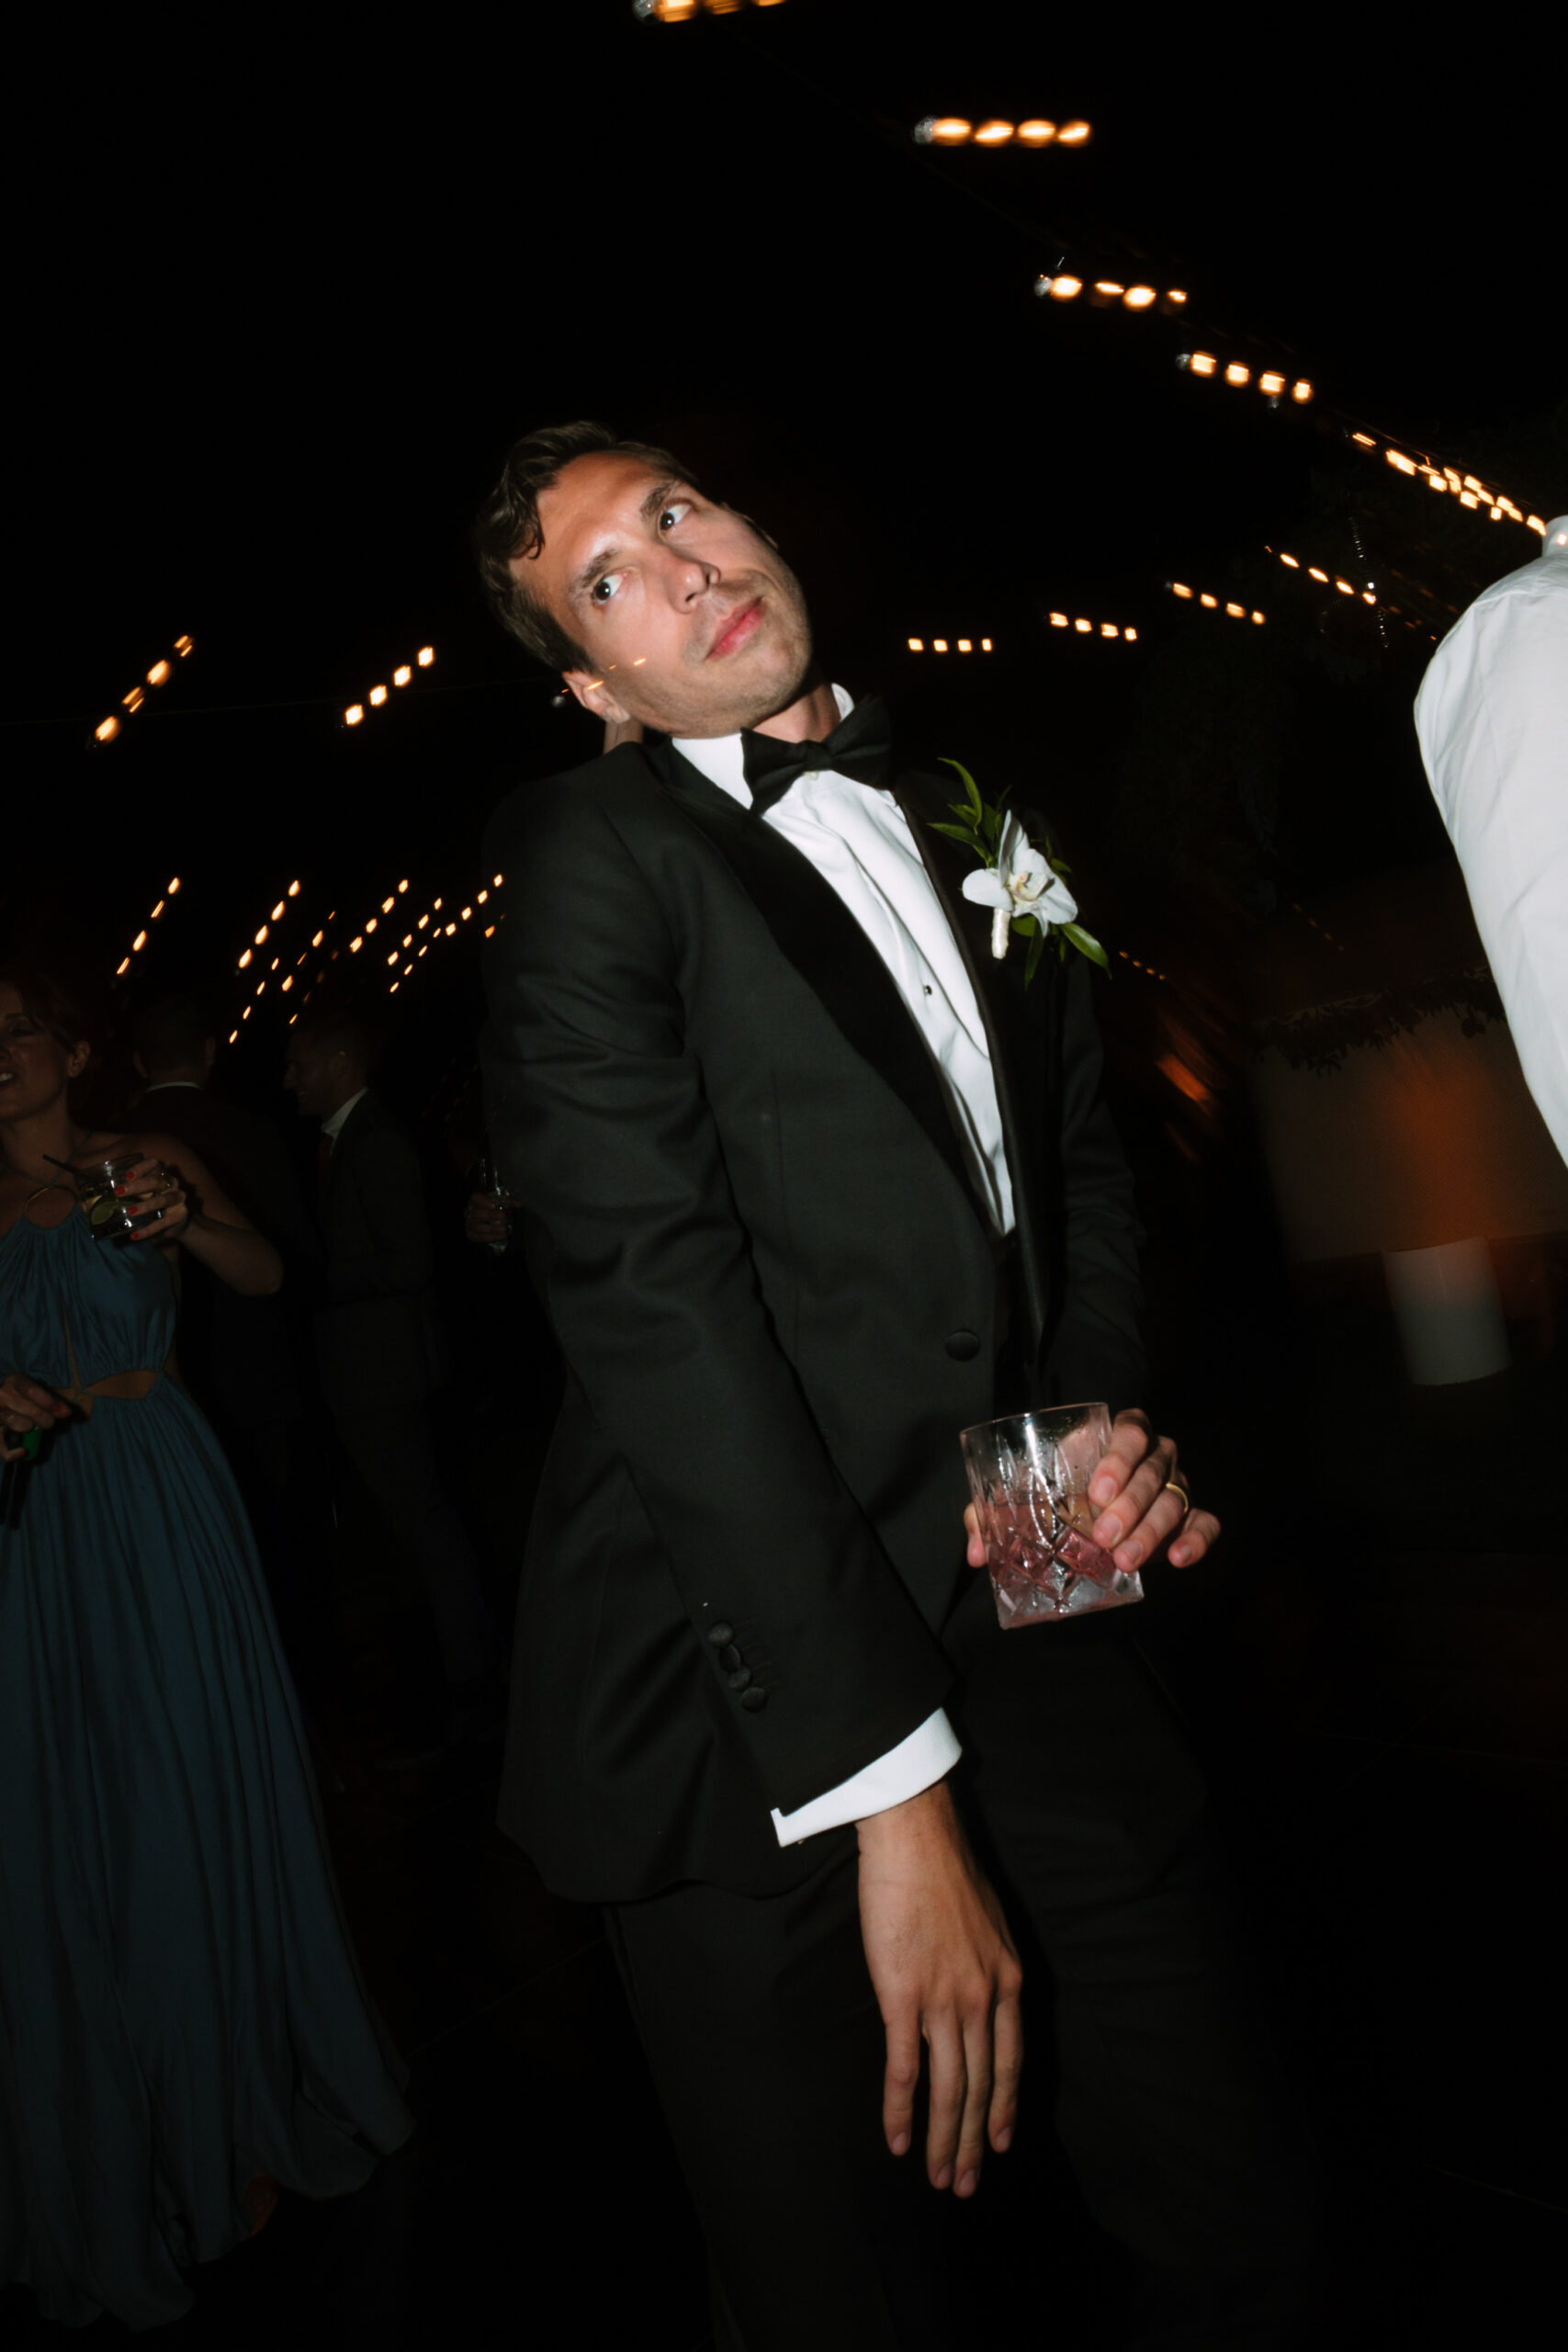 shutter drag photo of groom dancing with a cocktail in his hand